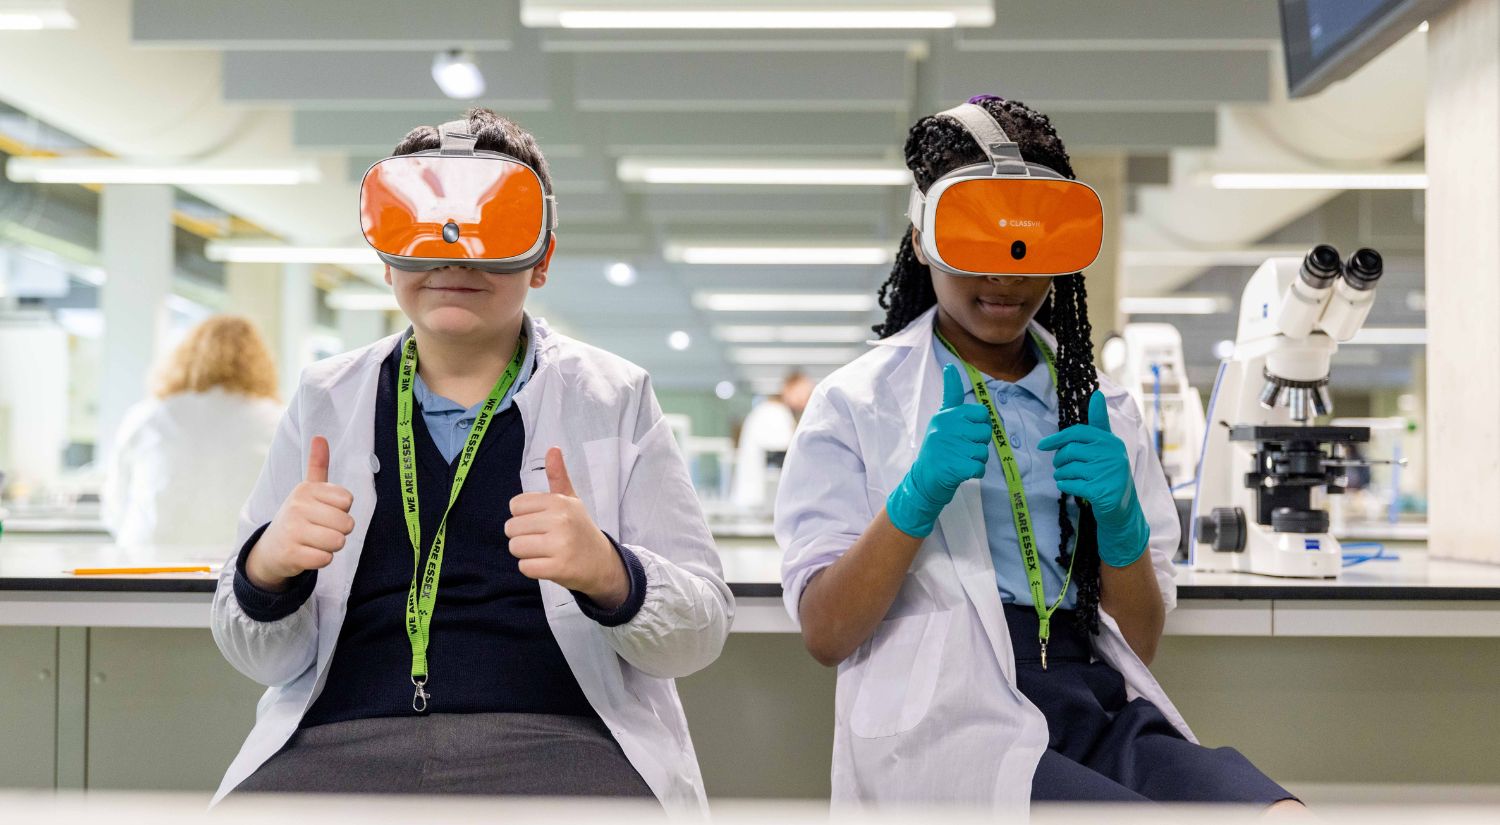 Youngsters explore VR